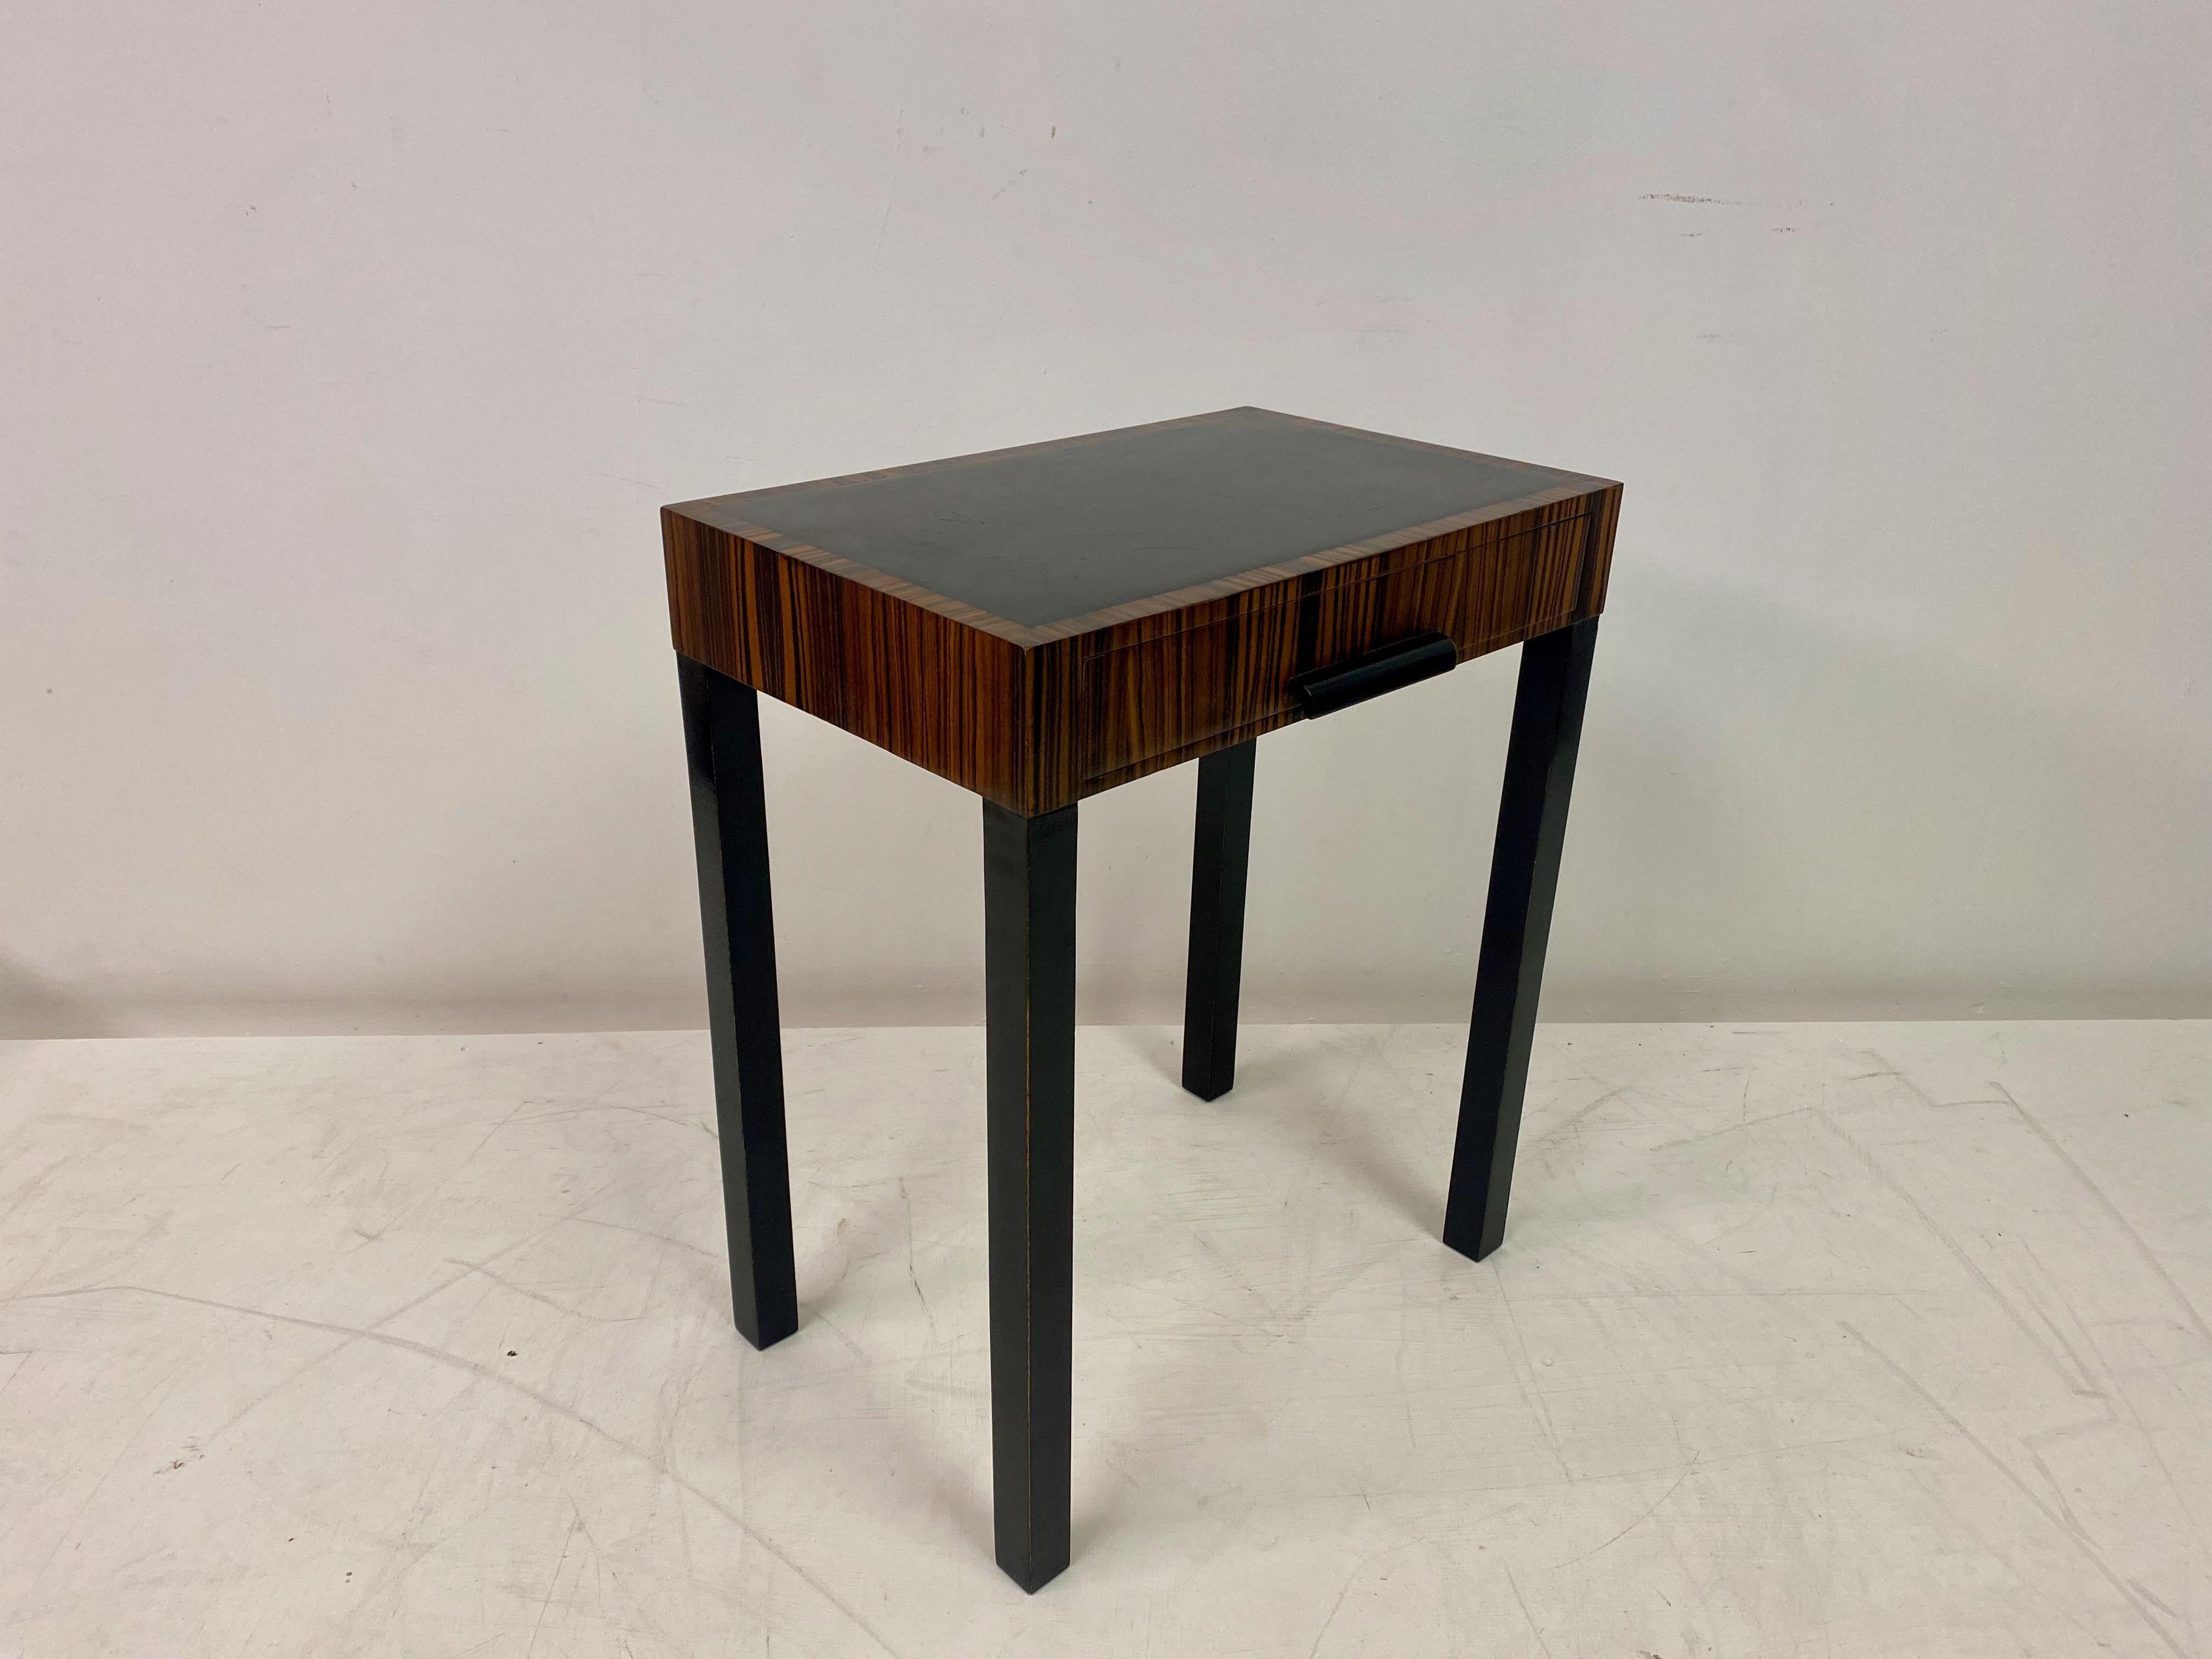 1930s Side Table by Axel Einar Hjorth for AB Nordiska Kompaniet In Good Condition In London, London